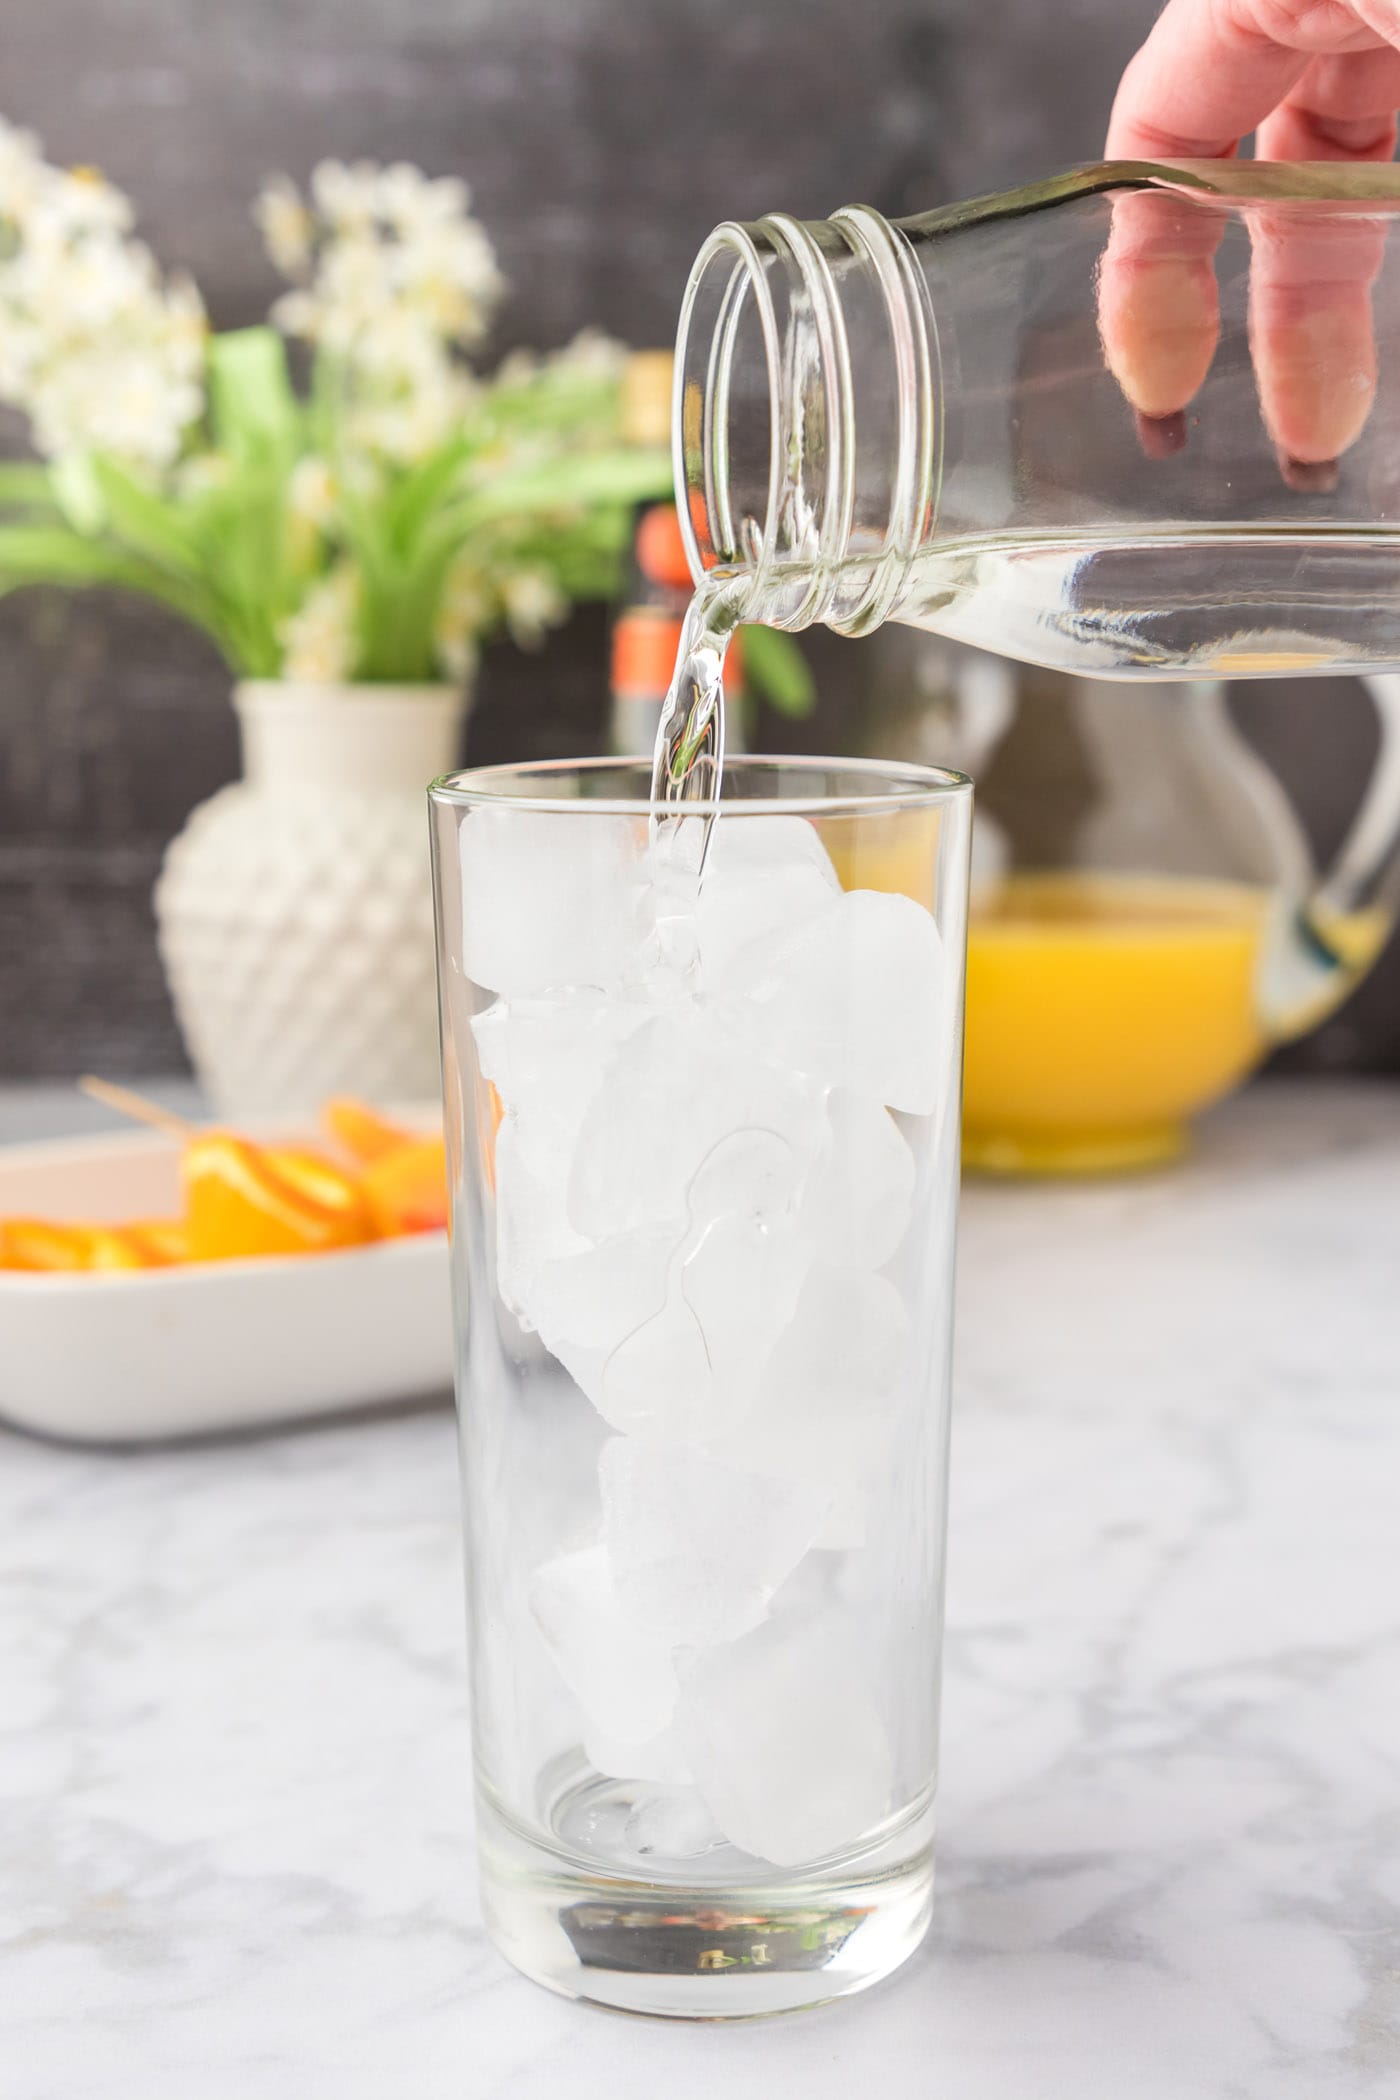 pouring peach schnapps into glass of ice